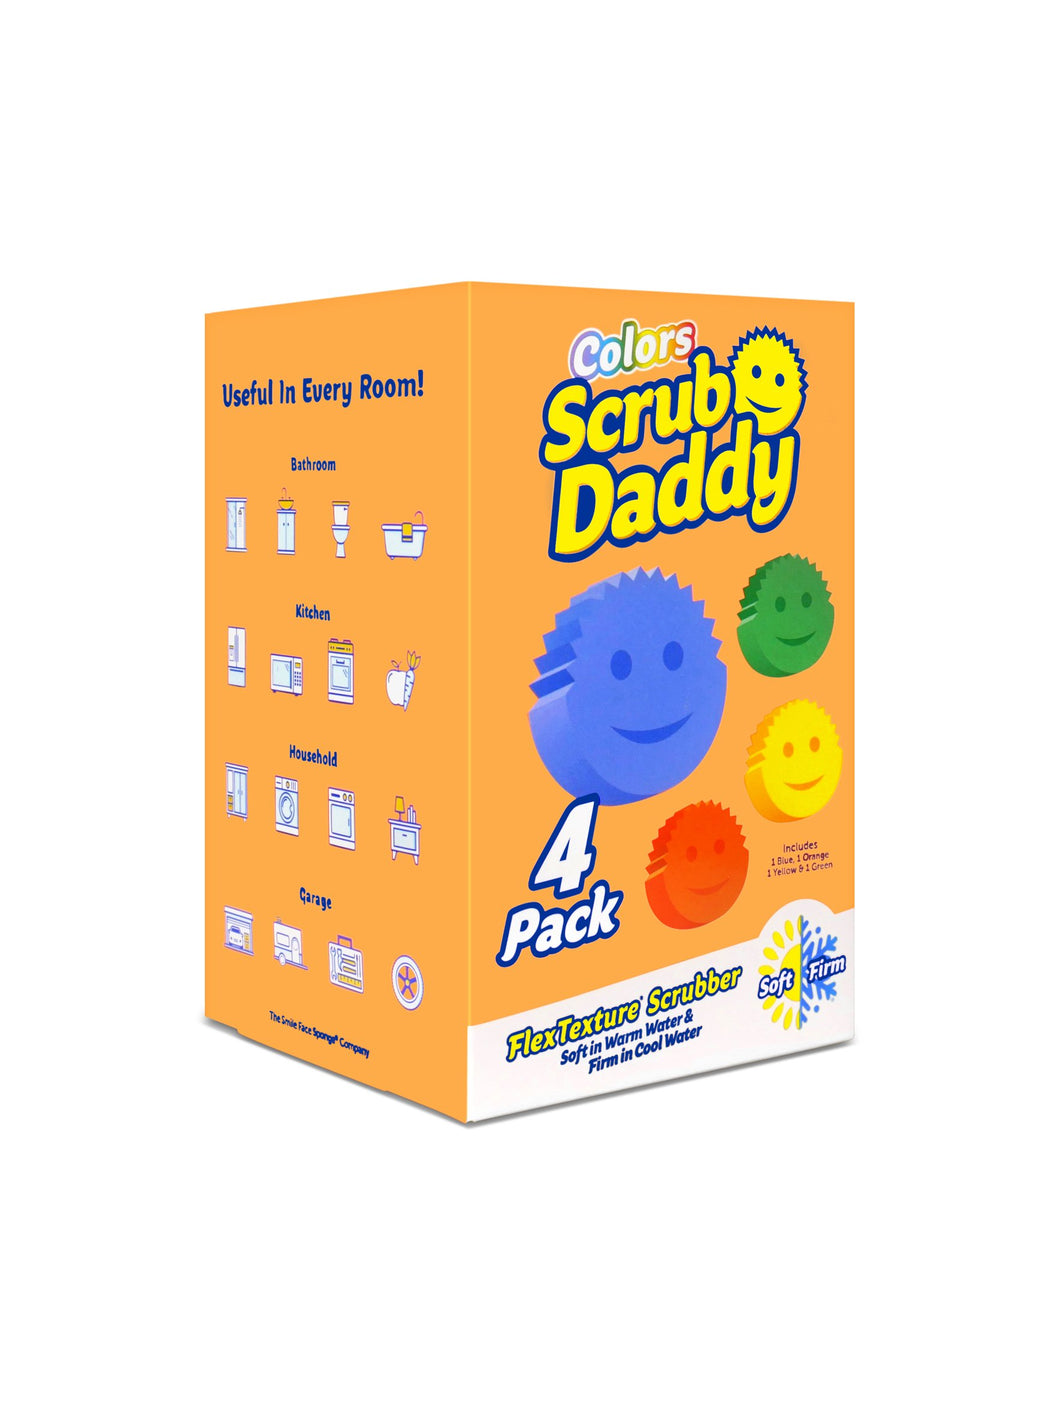 Scrub Daddy Colors - Color Code Cleaning, FlexTexture, Soft in Warm Water, Firm in Cold - 4ct Set